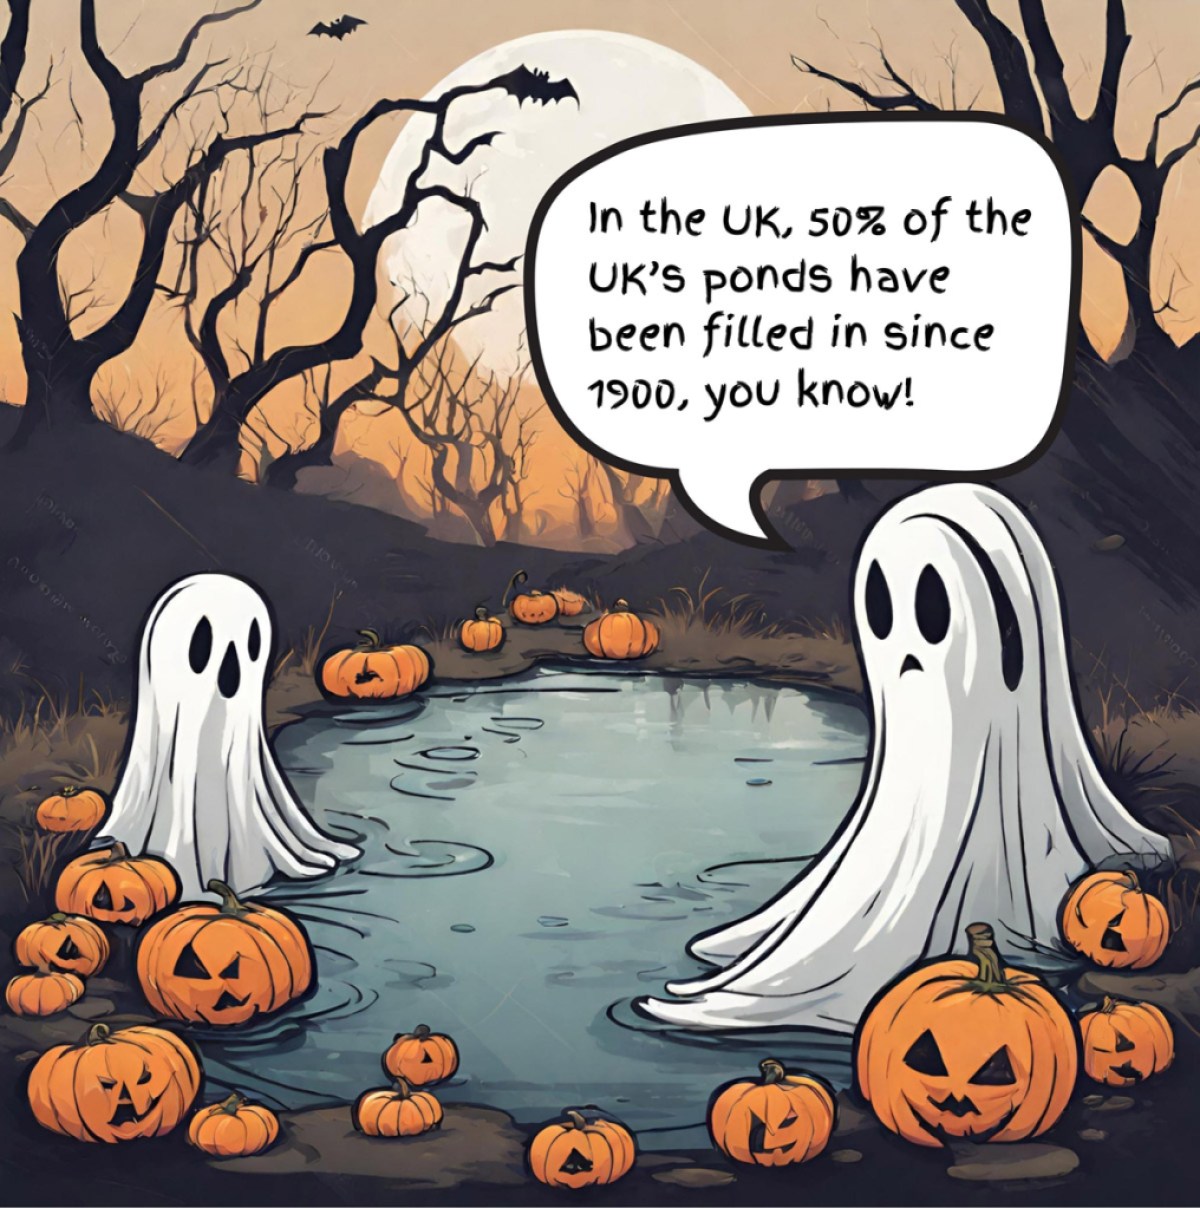 Cartoon of two ghosts in a Halloween scene, discussing ghost ponds